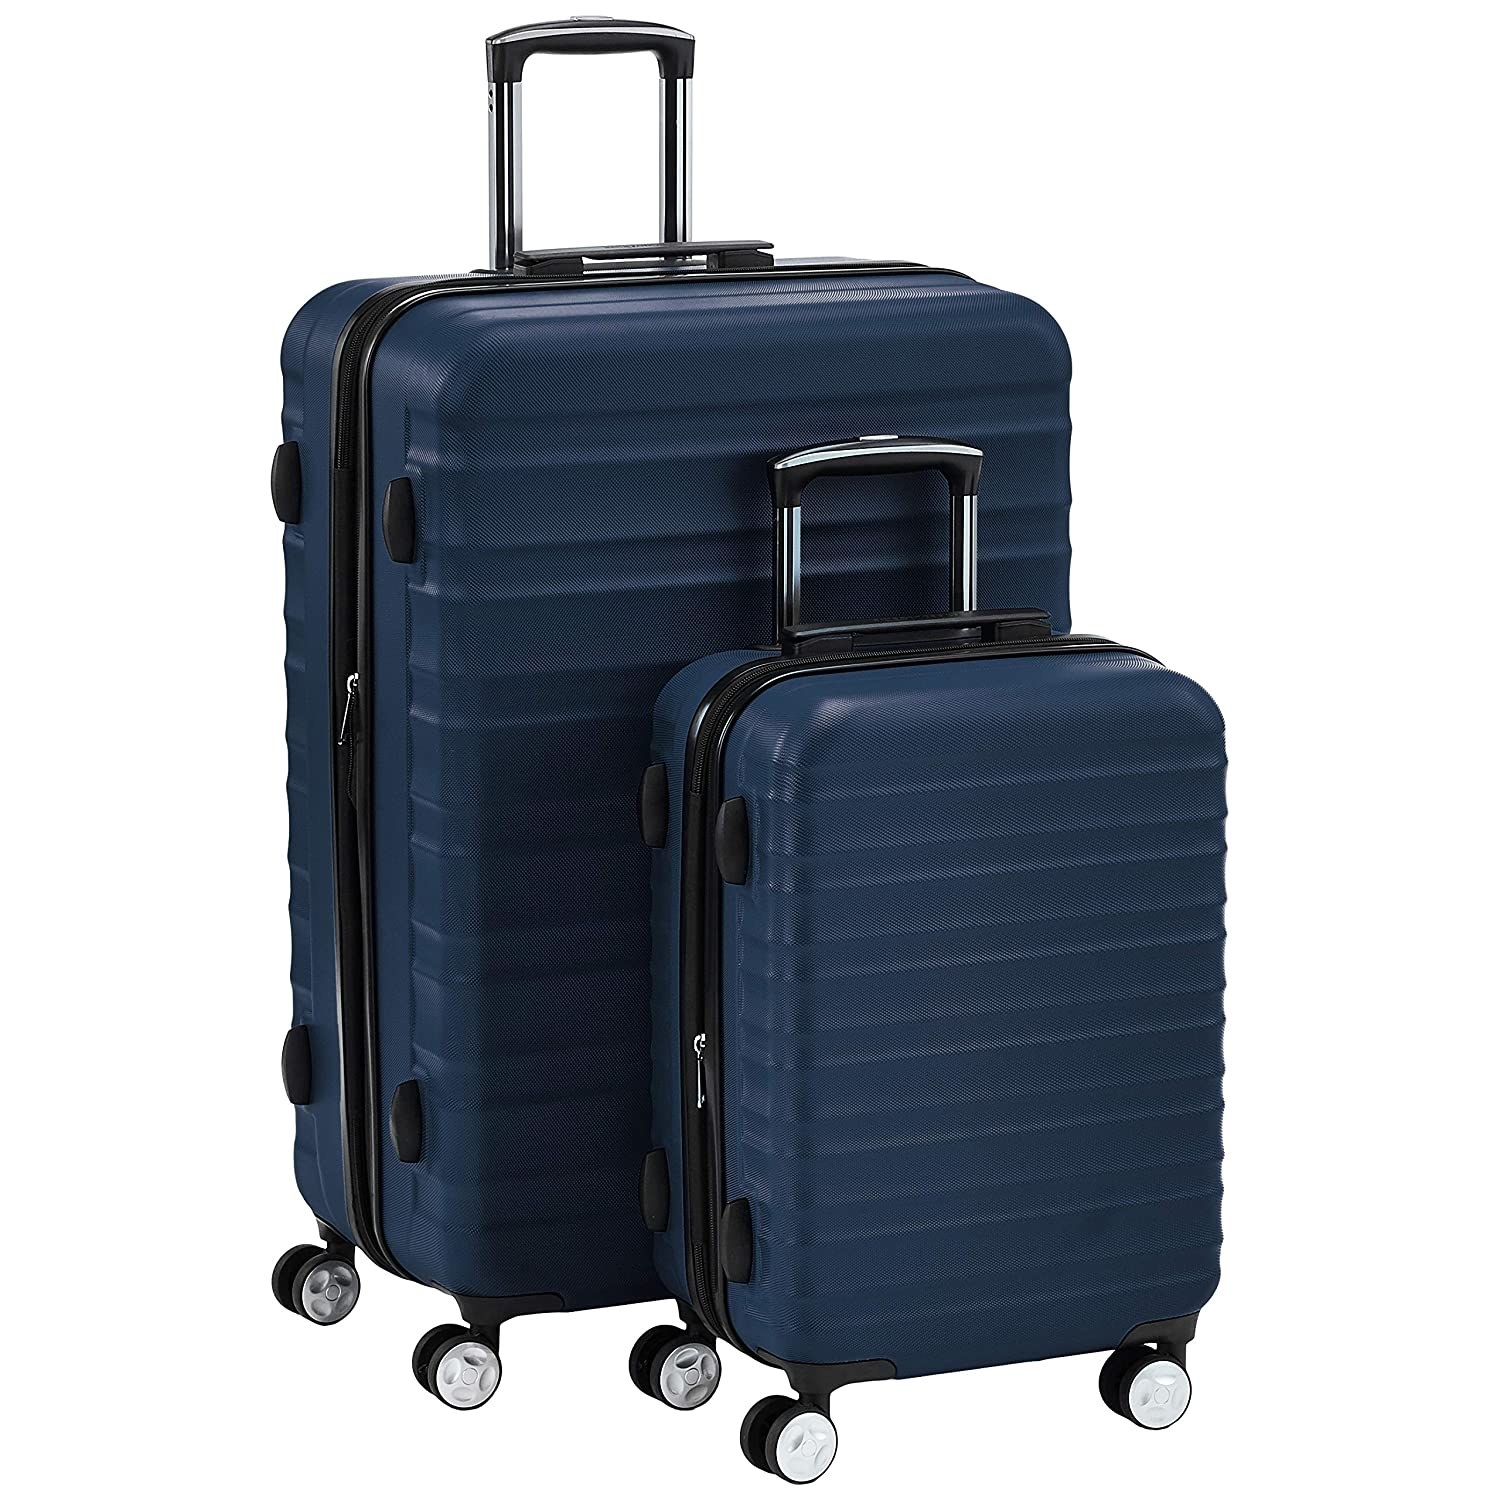 A pair of wheeled suitcases of different sizes in blue, with their handles pulled up